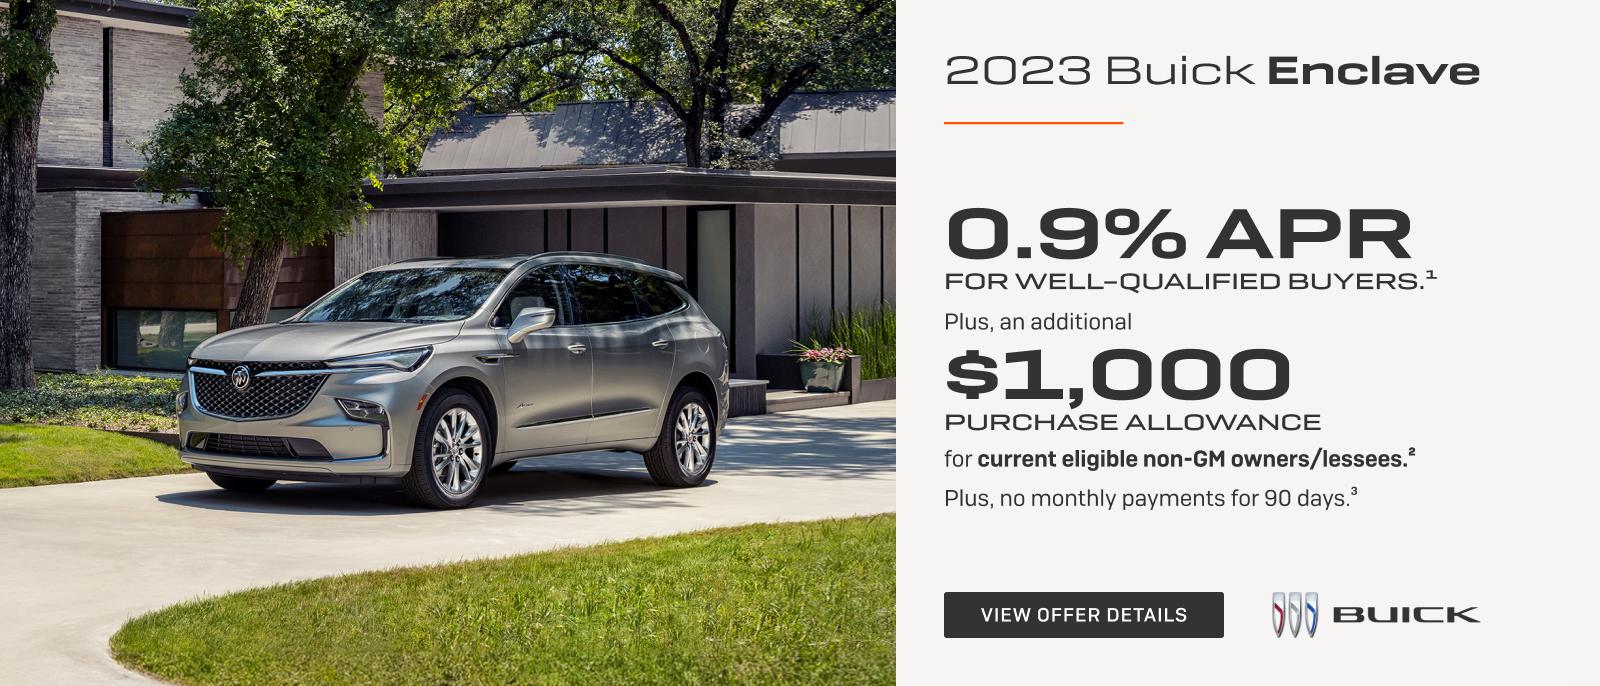 0.9% APR 
FOR WELL-QUALIFIED BUYERS.1

Plus, an additional $1,000 PURCHASE ALLOWANCE for current eligible non-GM owners/lessees.2

Plus, no monthly payments for 90 days.3